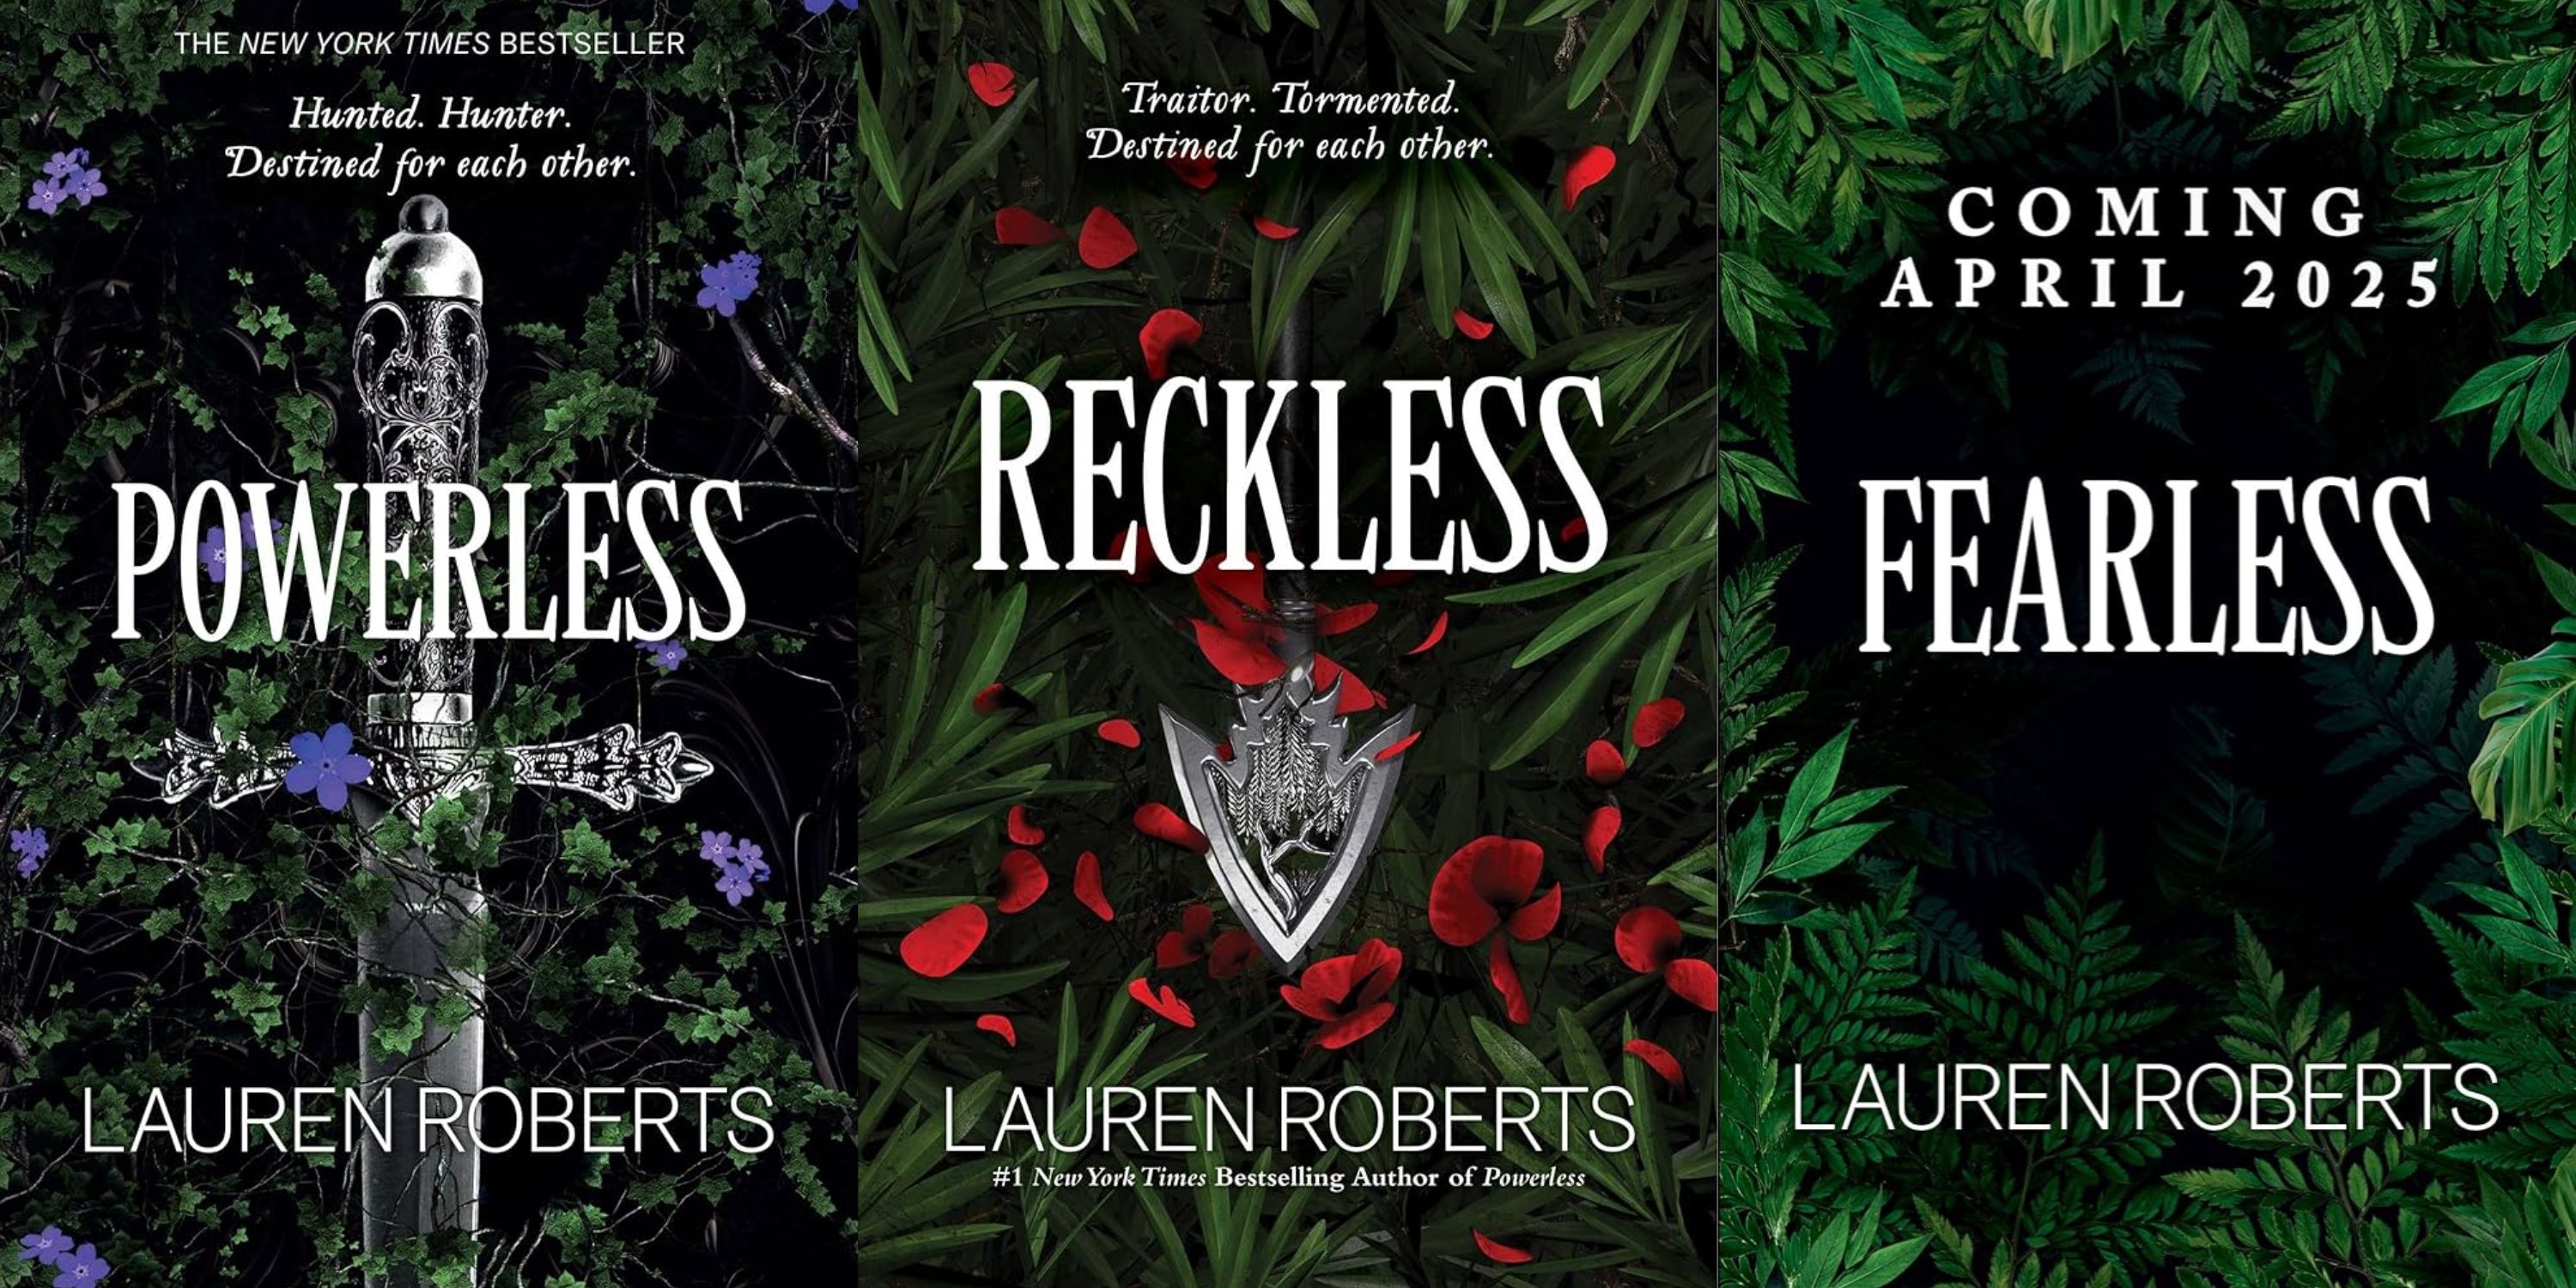 Powerless trilogy by Lauren Roberts with the covers of Powerless, Reckless and the promo image for Fearless